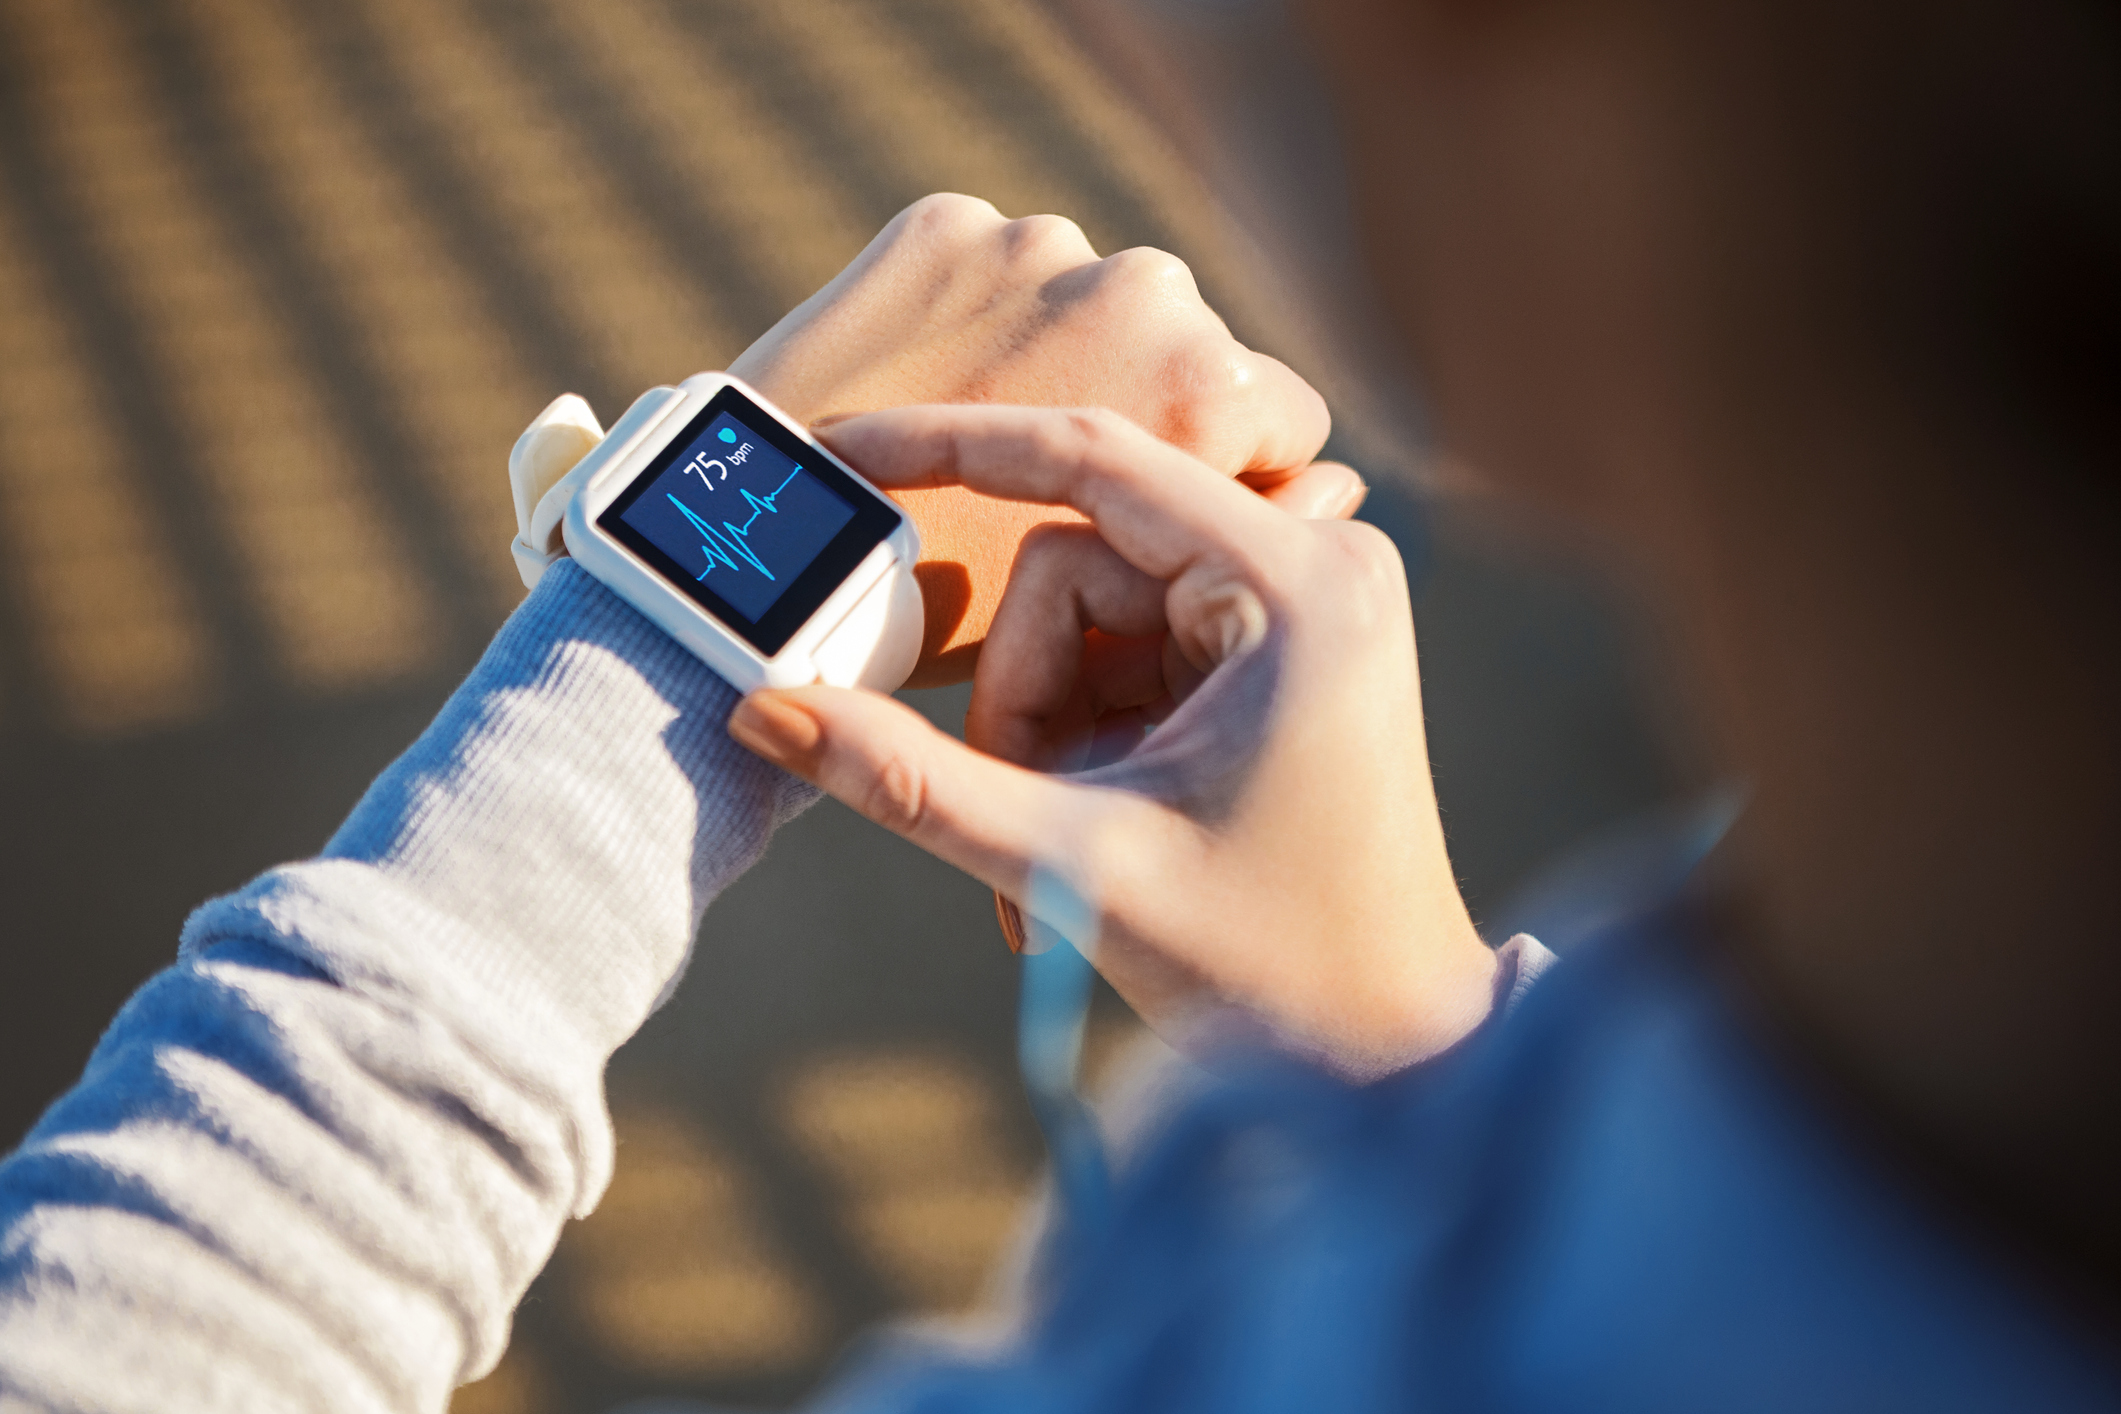 A woman checks her heart rate on a wearable watch app; it says 75 bpm